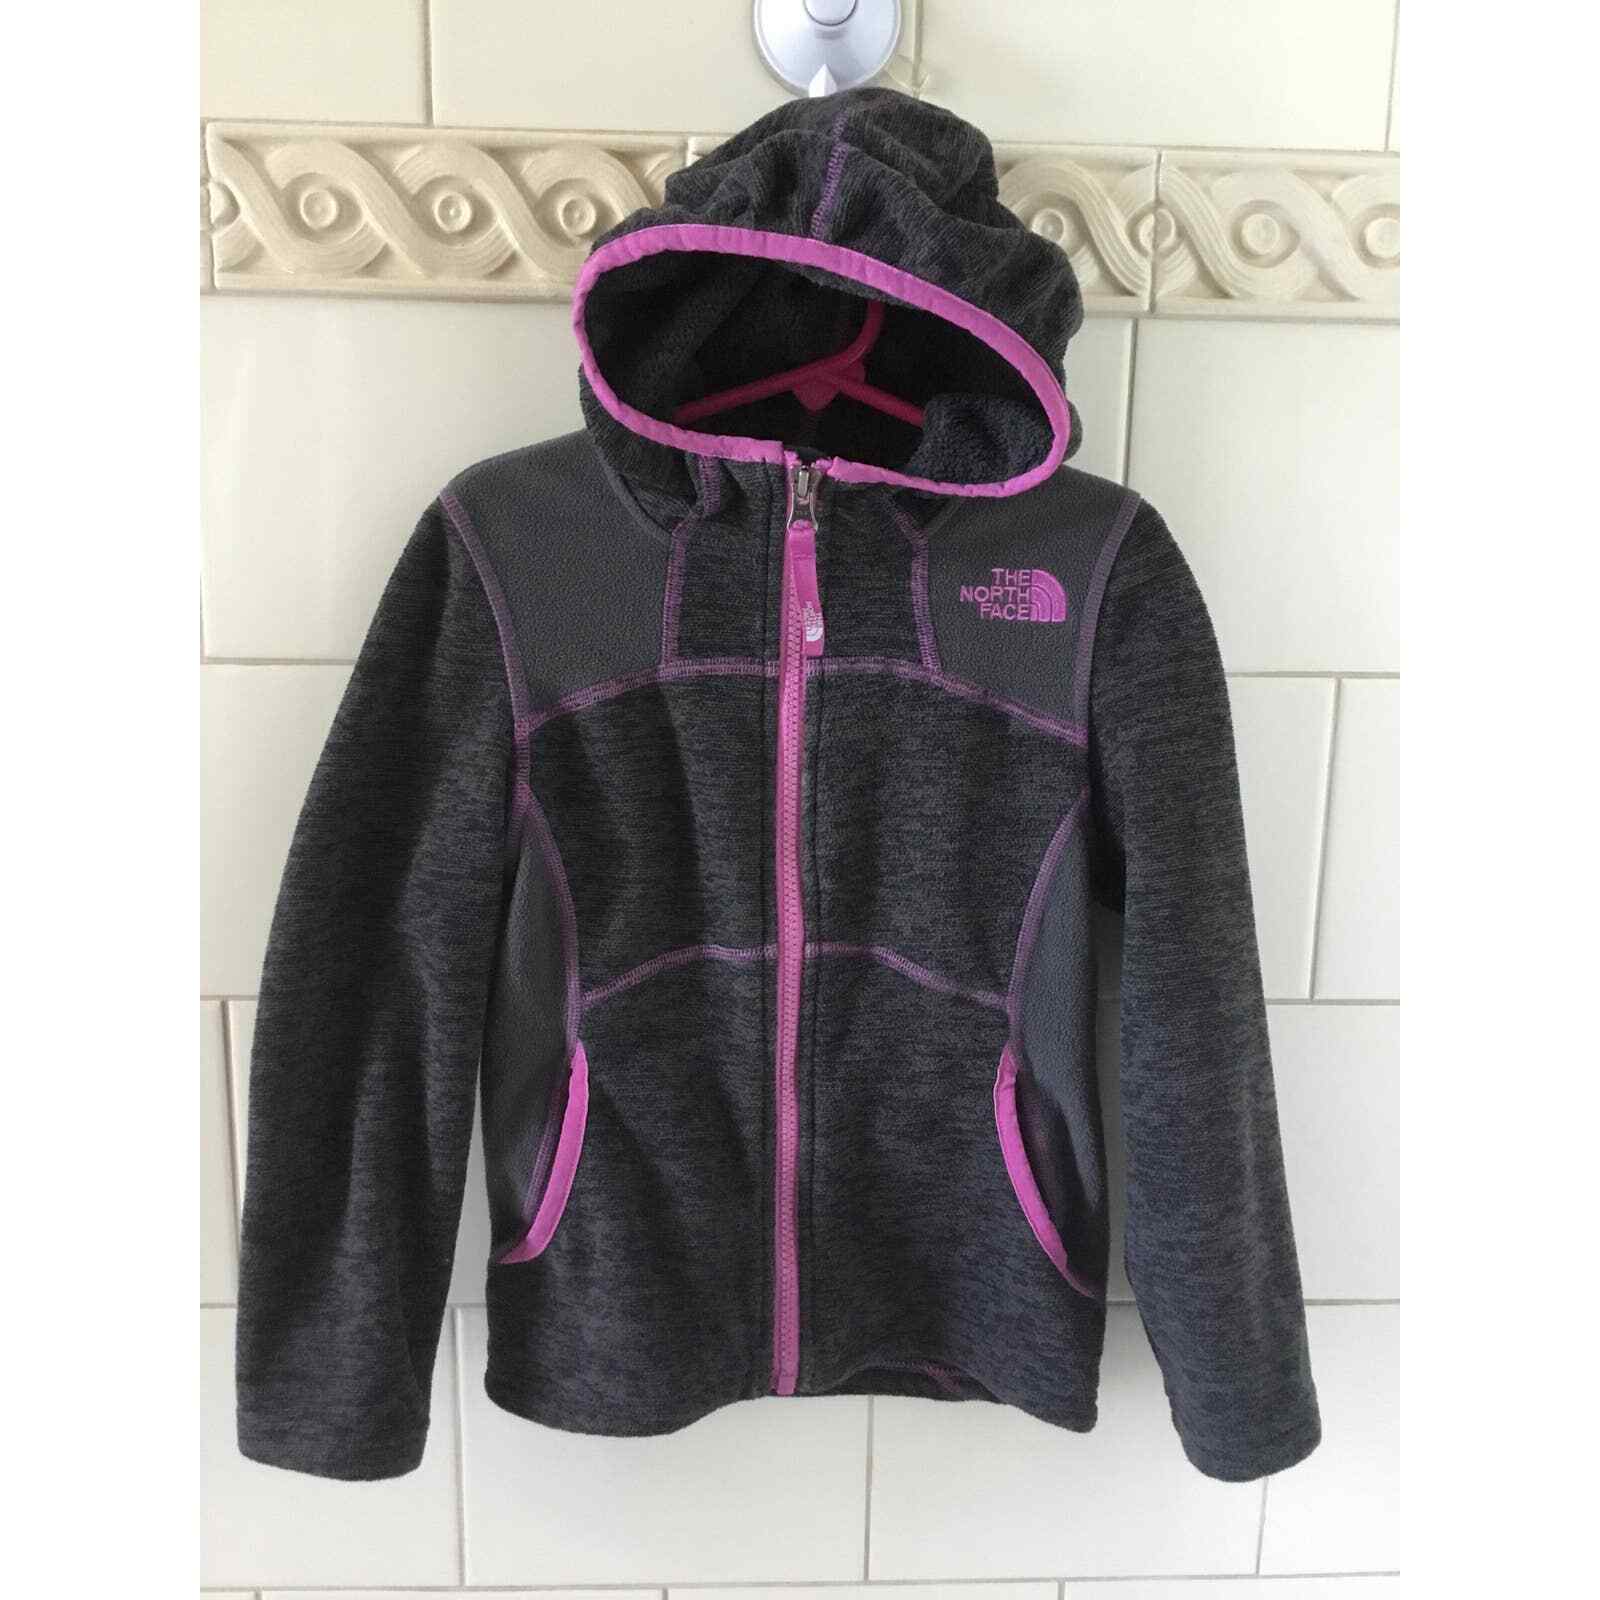 The North Face Girl’s Zip-Up Fleece Hoodie Gray with Pink  XXS